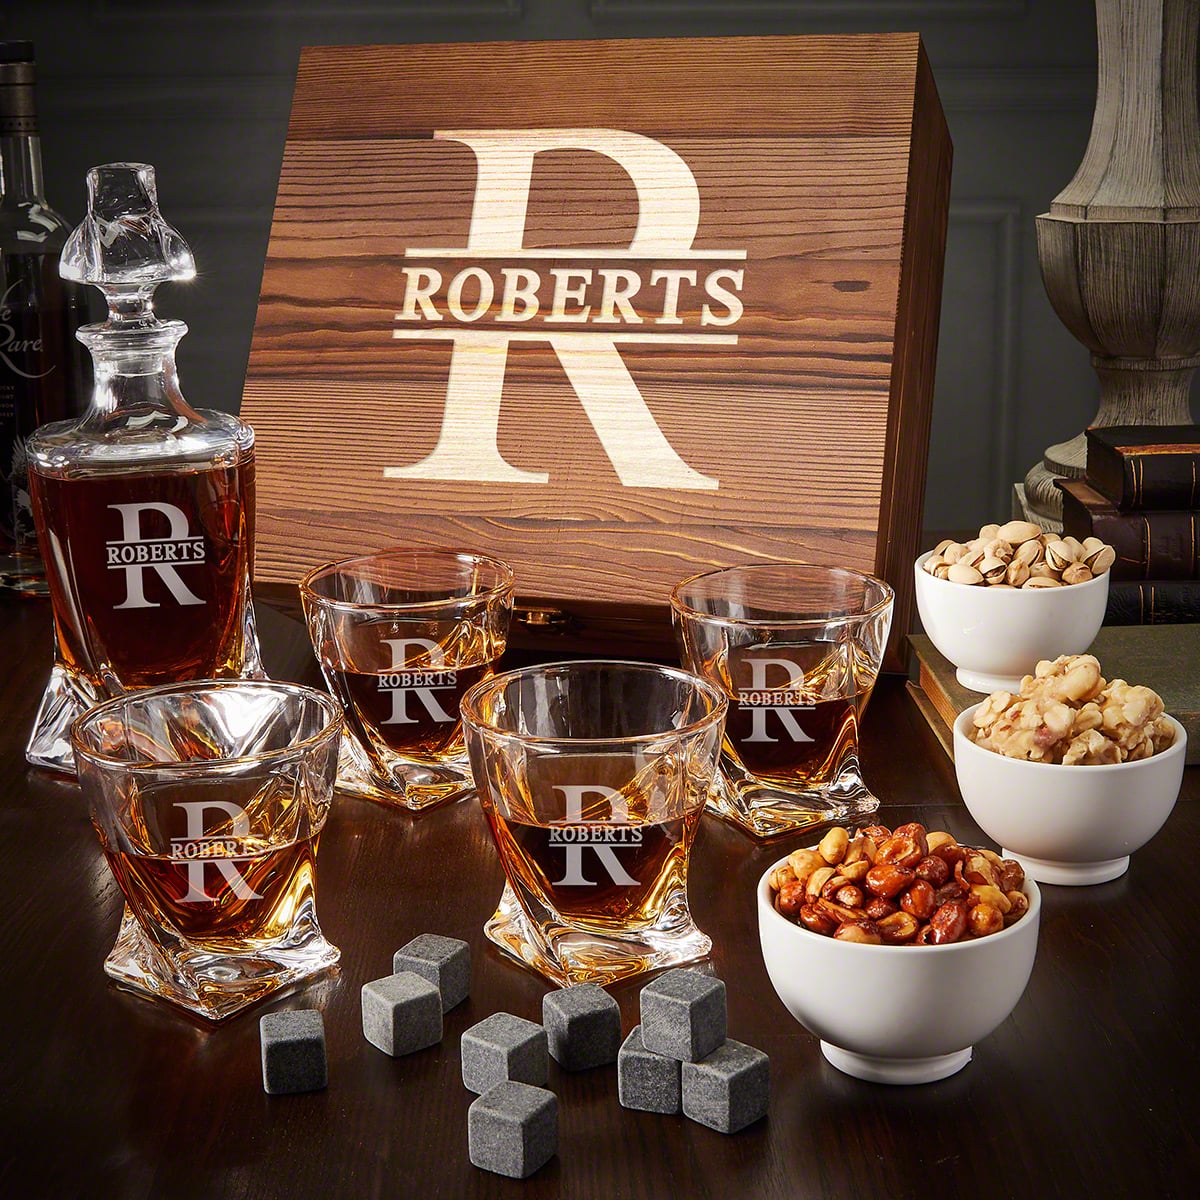 Vicente Custom Whiskey Decanter Set with Whiskey Glasses & Snacks - 11pc